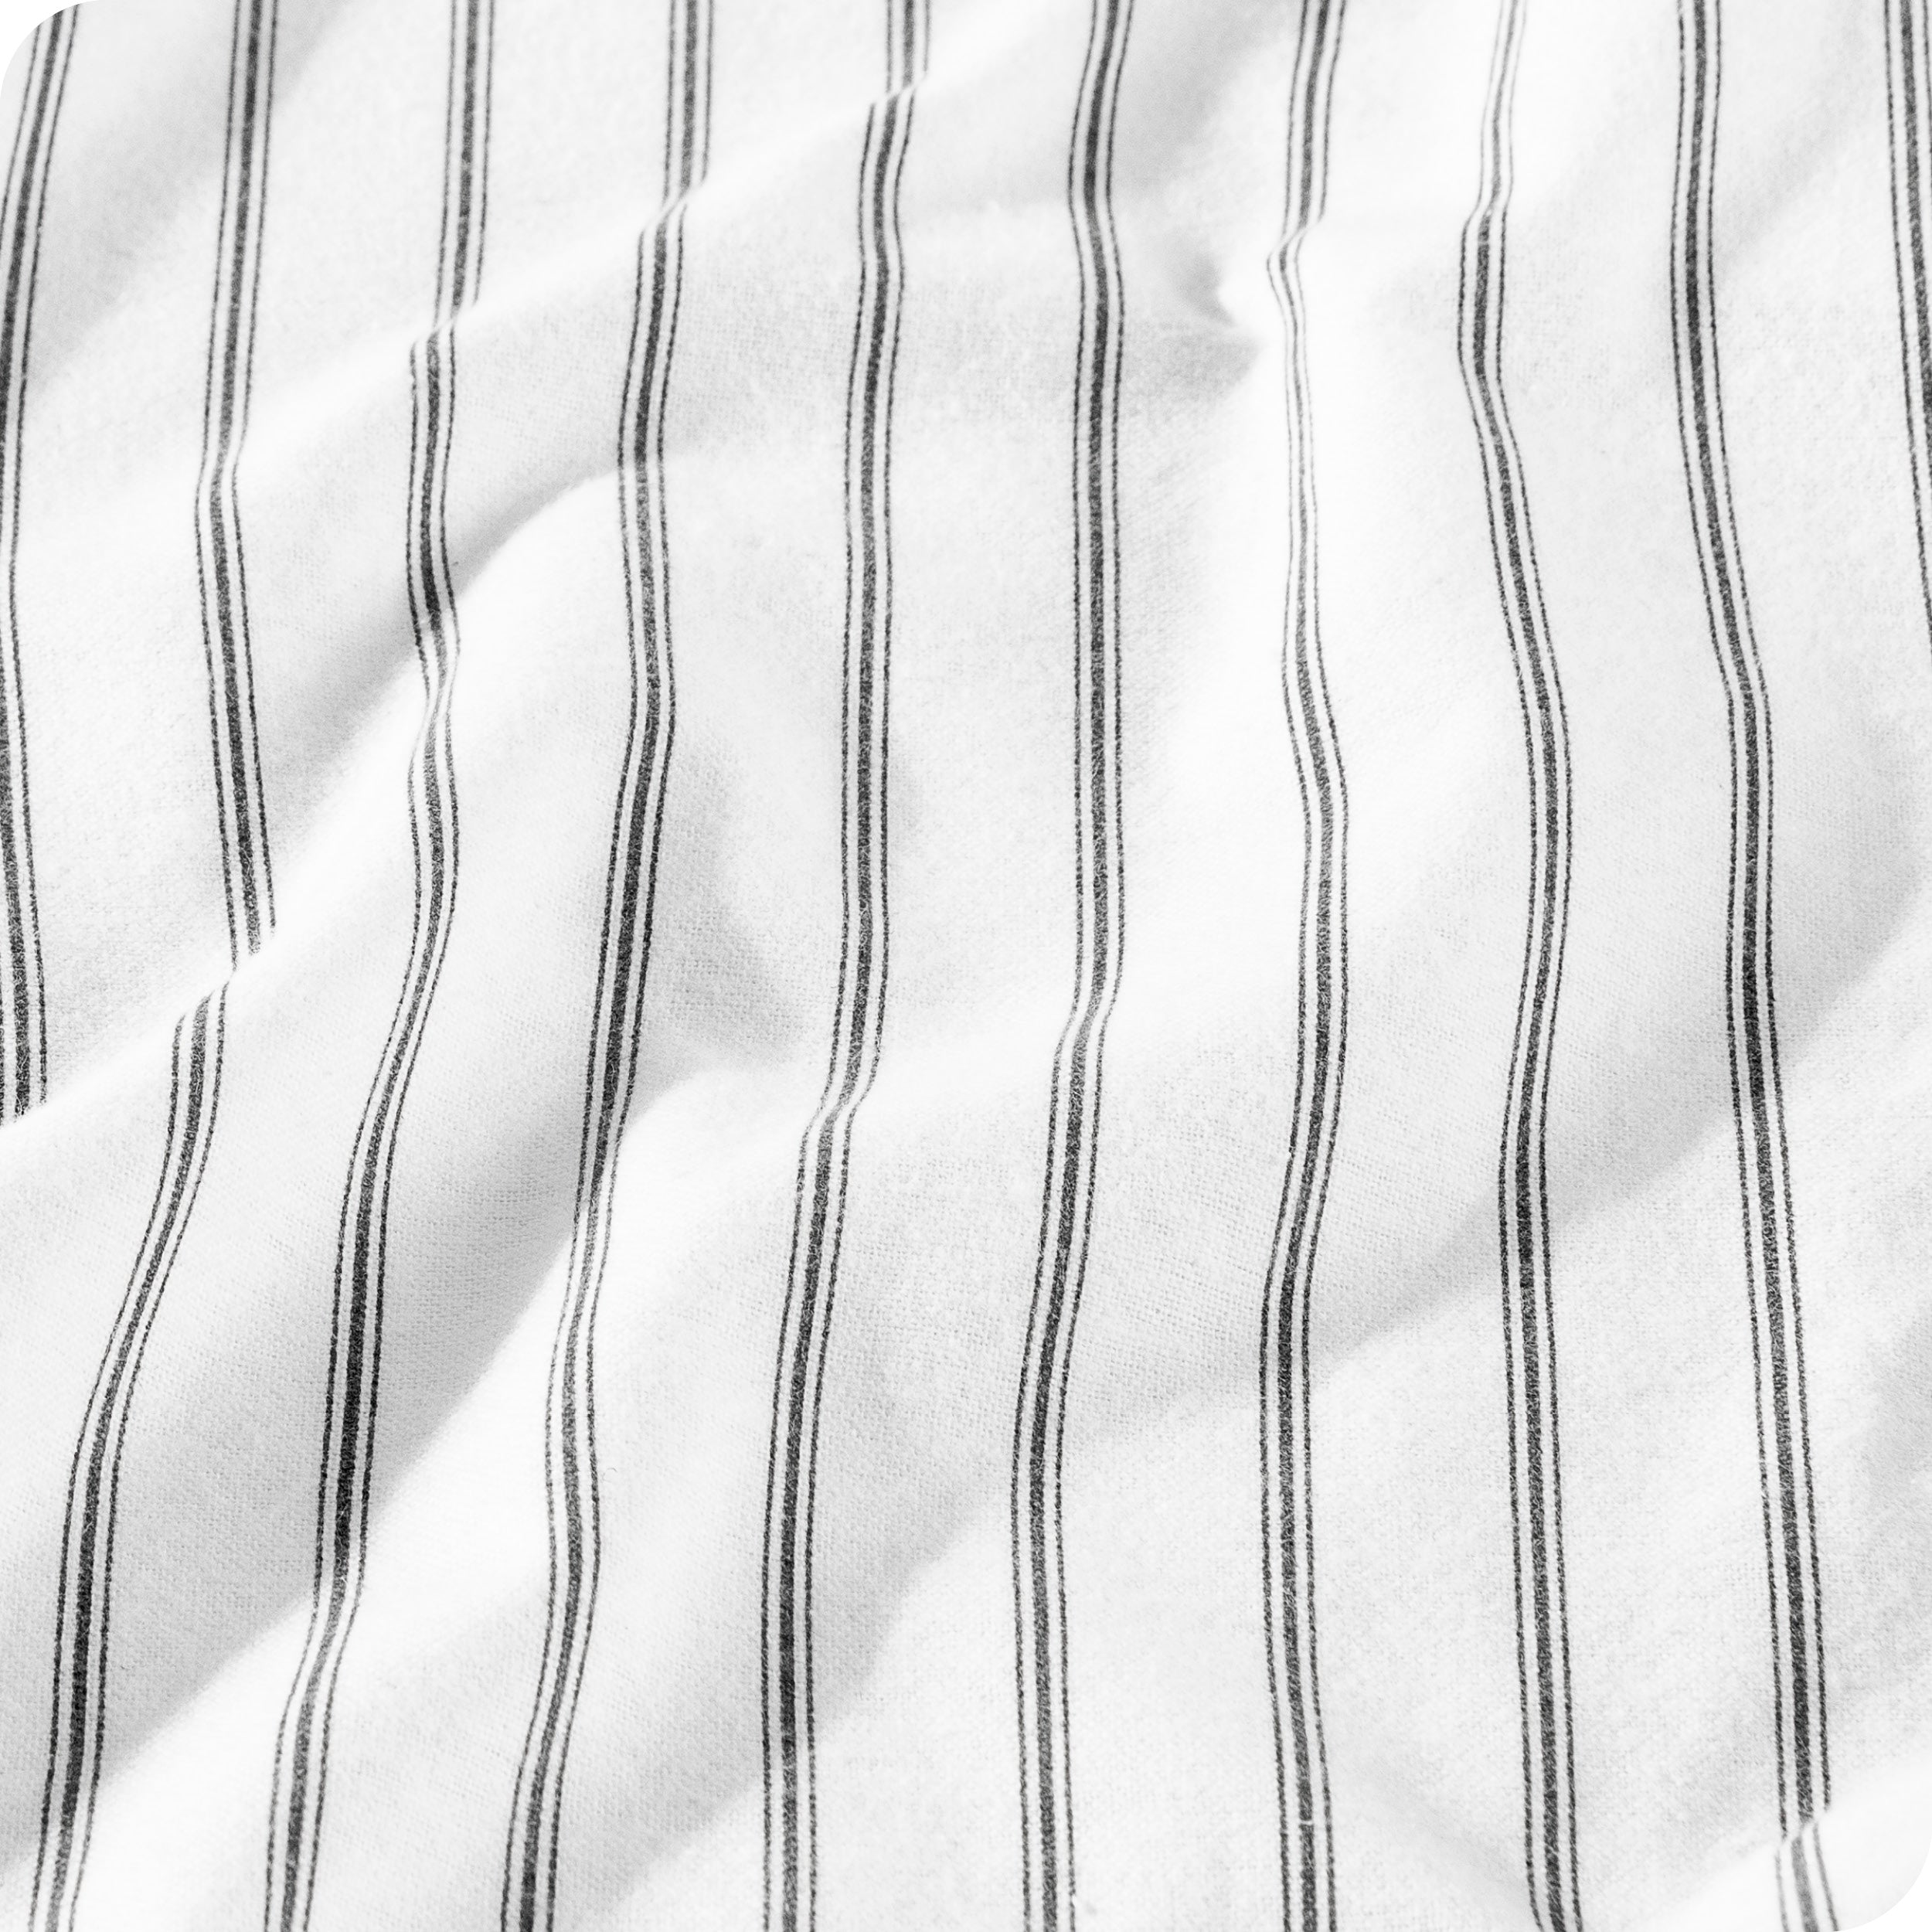 Close in view showing texture of sheet set fabric